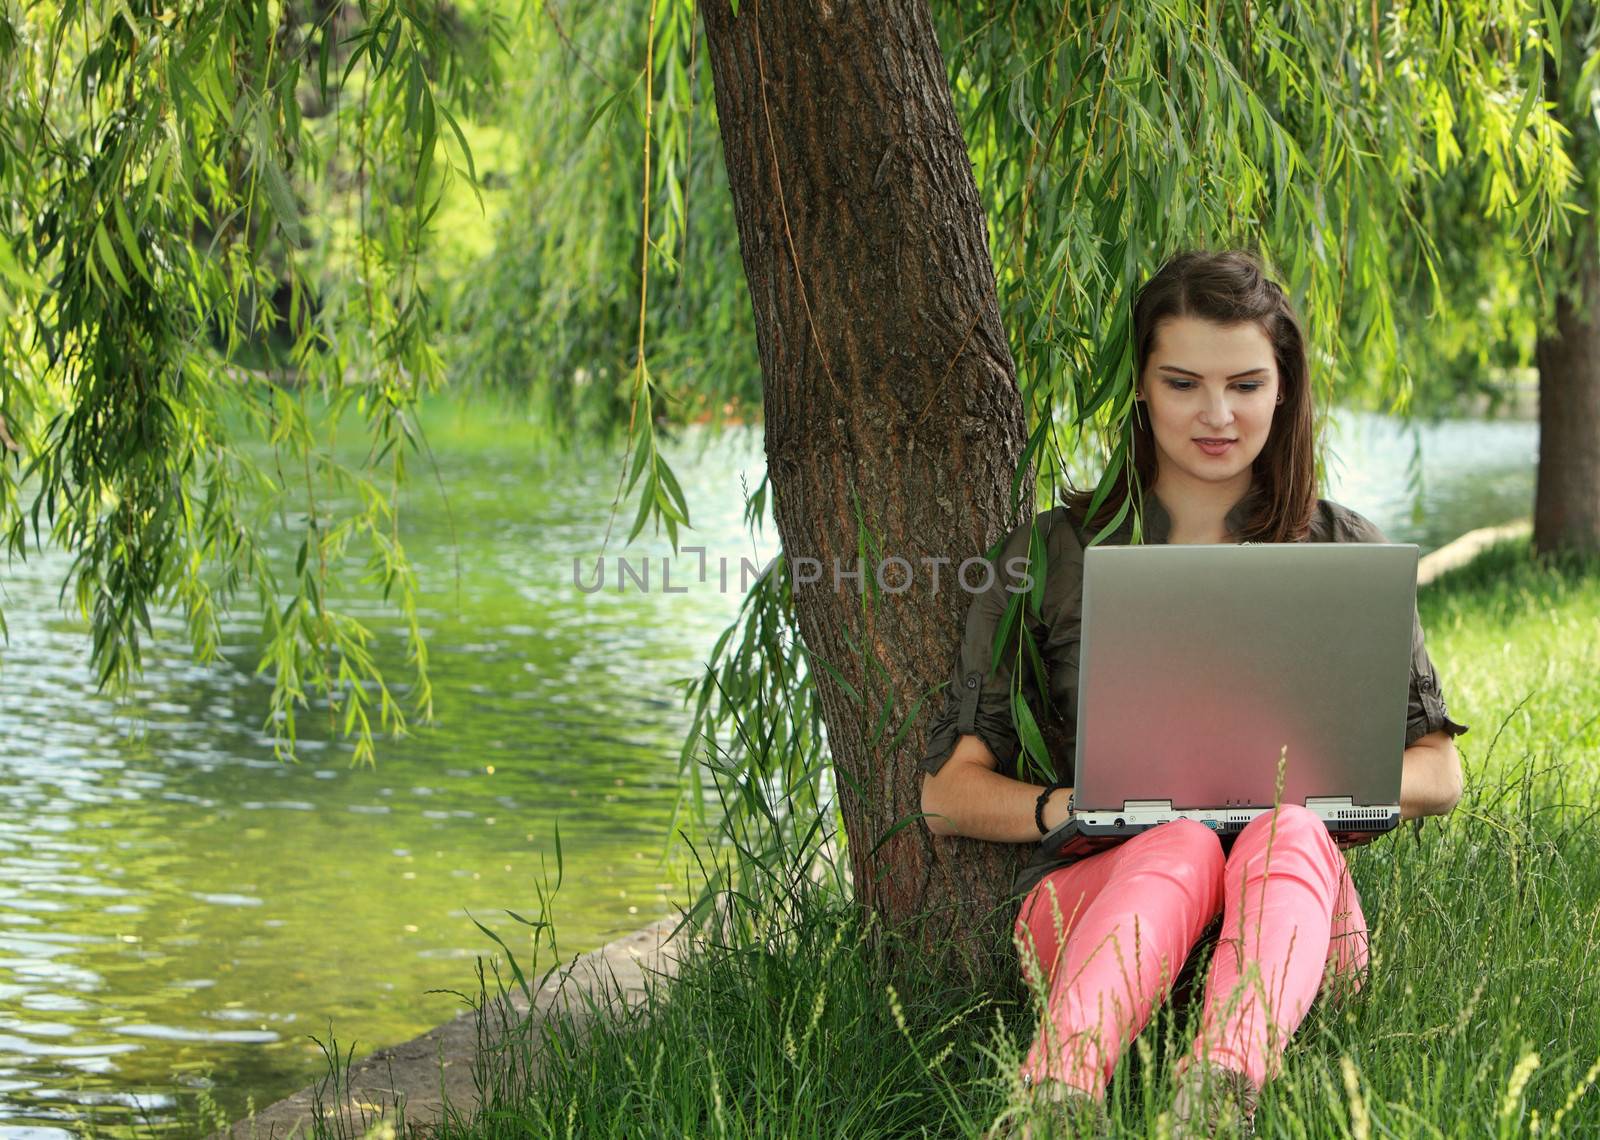 Young preety woman studying outside in a park under a willow tree, near a pond.